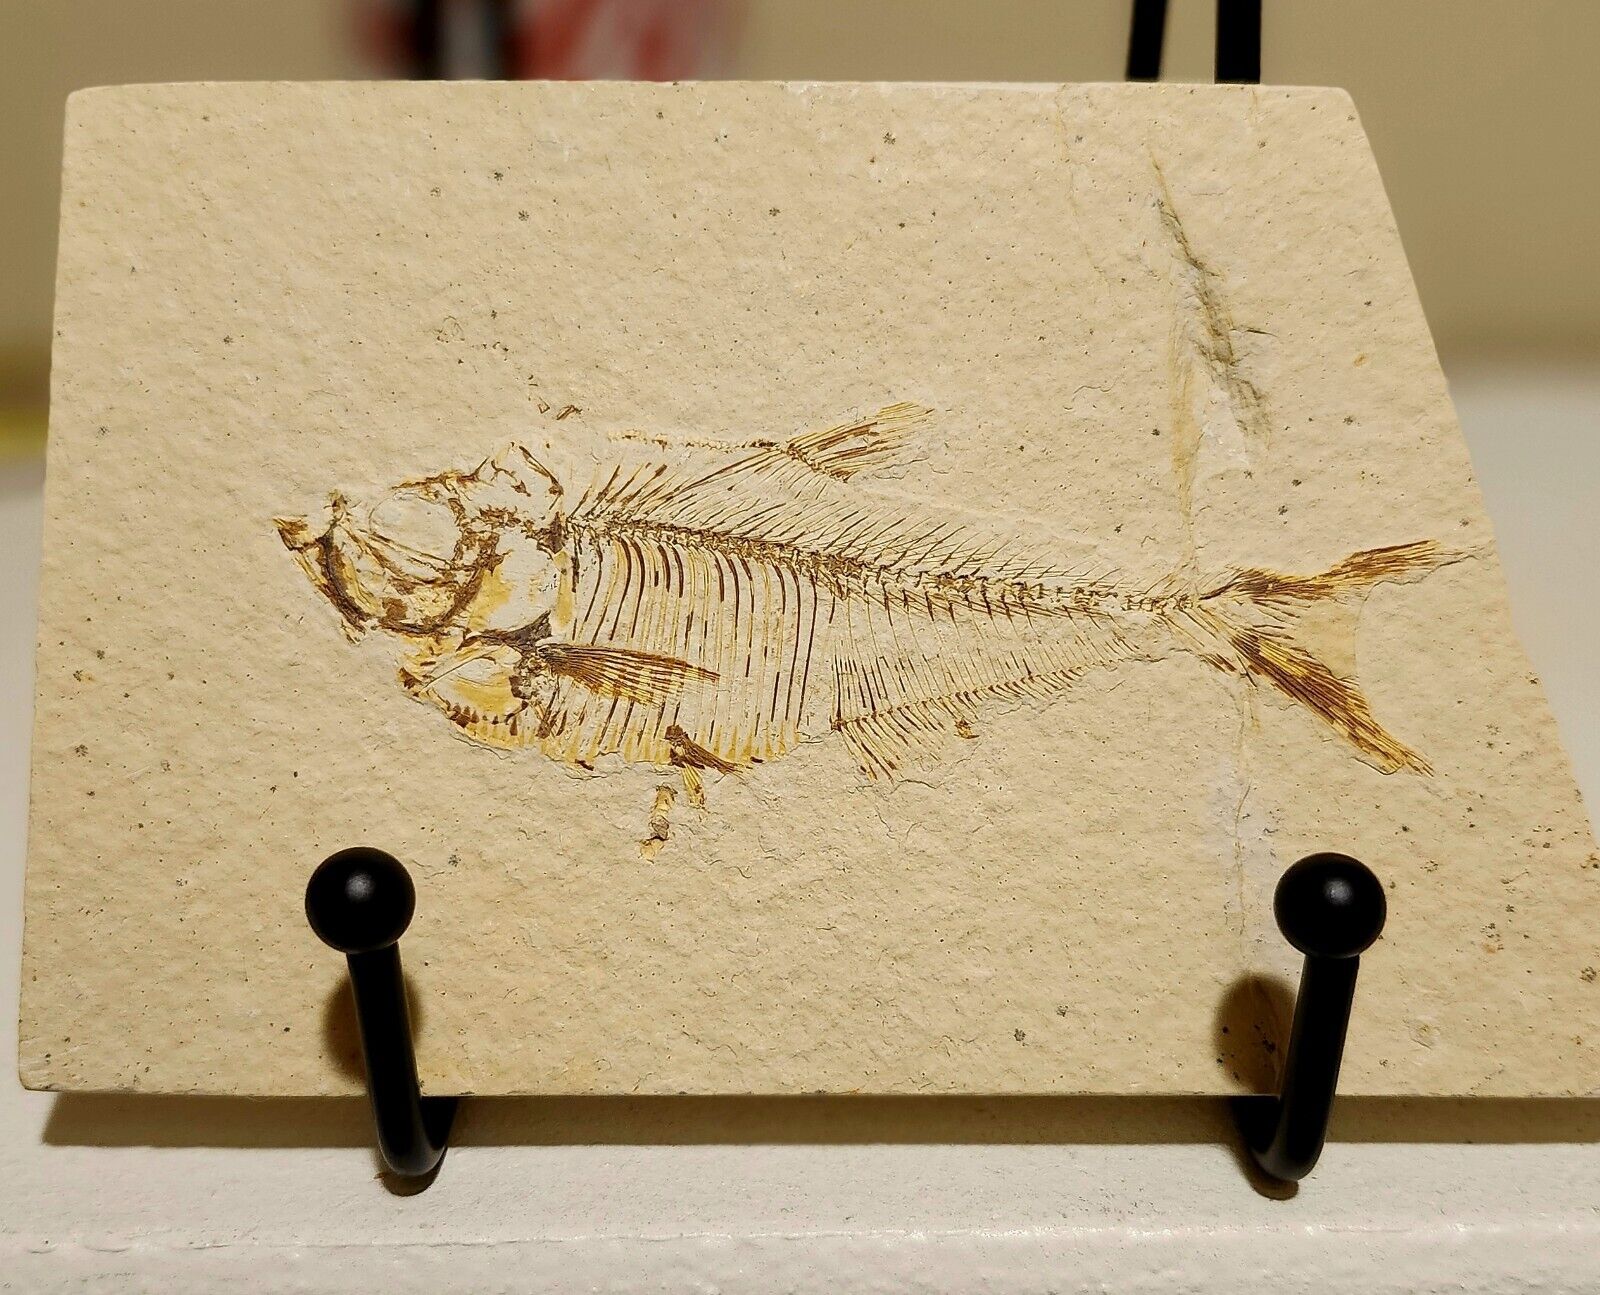 Fossilized Small Fish On Sandstone Or Natural Stone